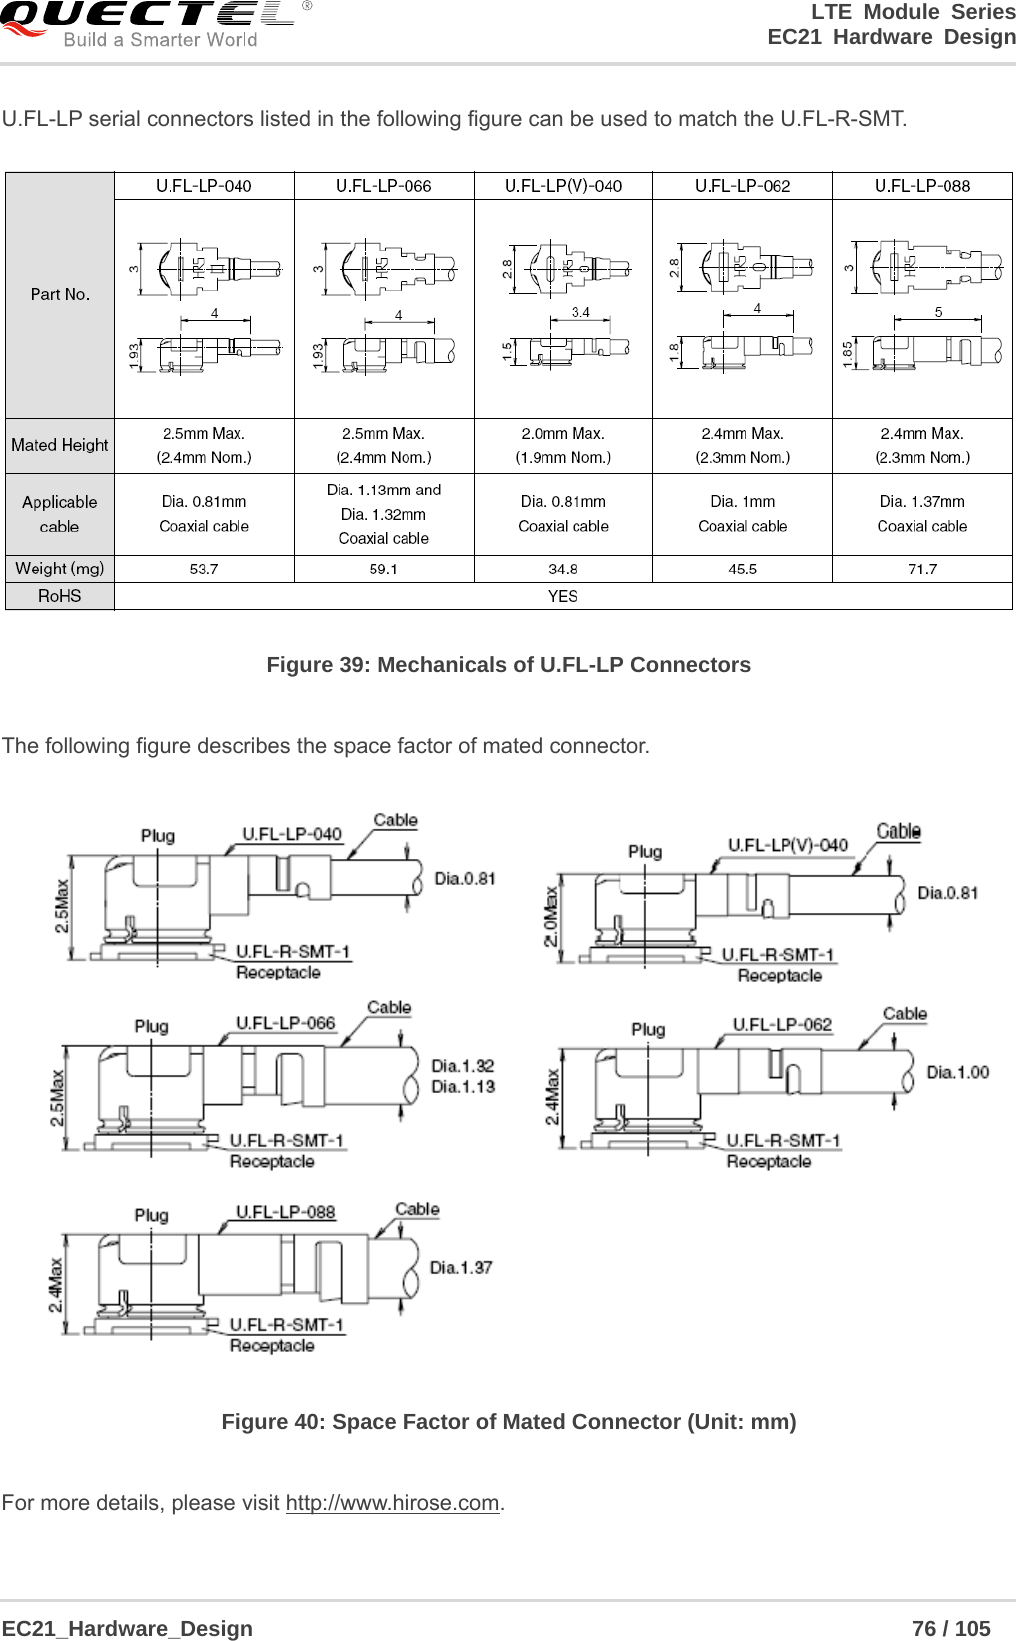                                                                        LTE Module Series                                                                 EC21 Hardware Design  EC21_Hardware_Design                                                            76 / 105    U.FL-LP serial connectors listed in the following figure can be used to match the U.FL-R-SMT.  Figure 39: Mechanicals of U.FL-LP Connectors  The following figure describes the space factor of mated connector.  Figure 40: Space Factor of Mated Connector (Unit: mm)  For more details, please visit http://www.hirose.com. 